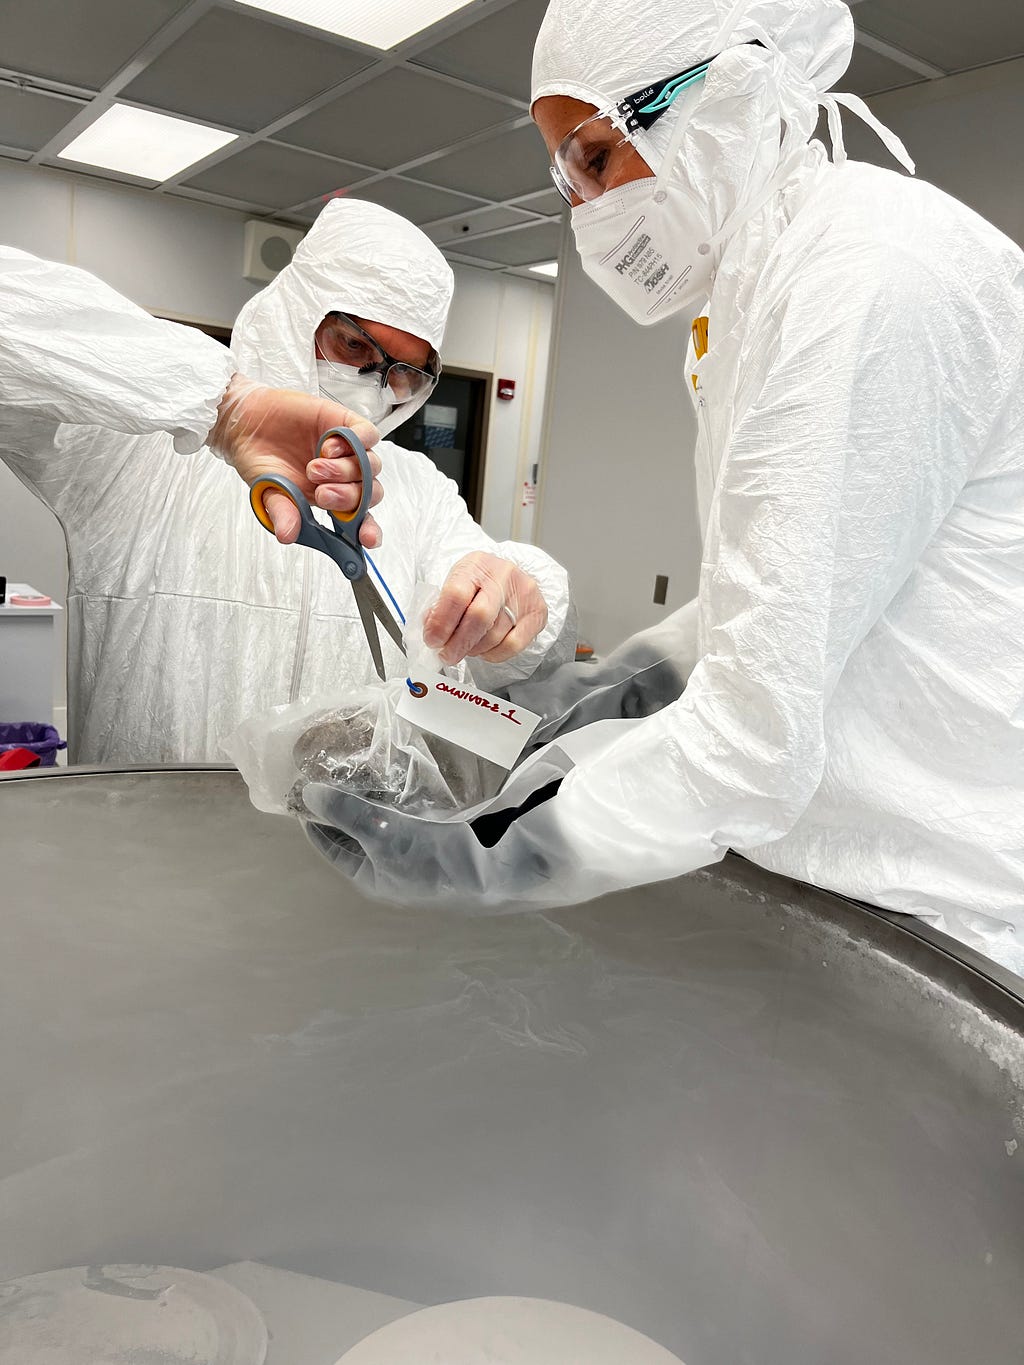 Two researchers wearing protective gear are cutting open a bag labeled “Omnivore 1” over an icy freezer container.